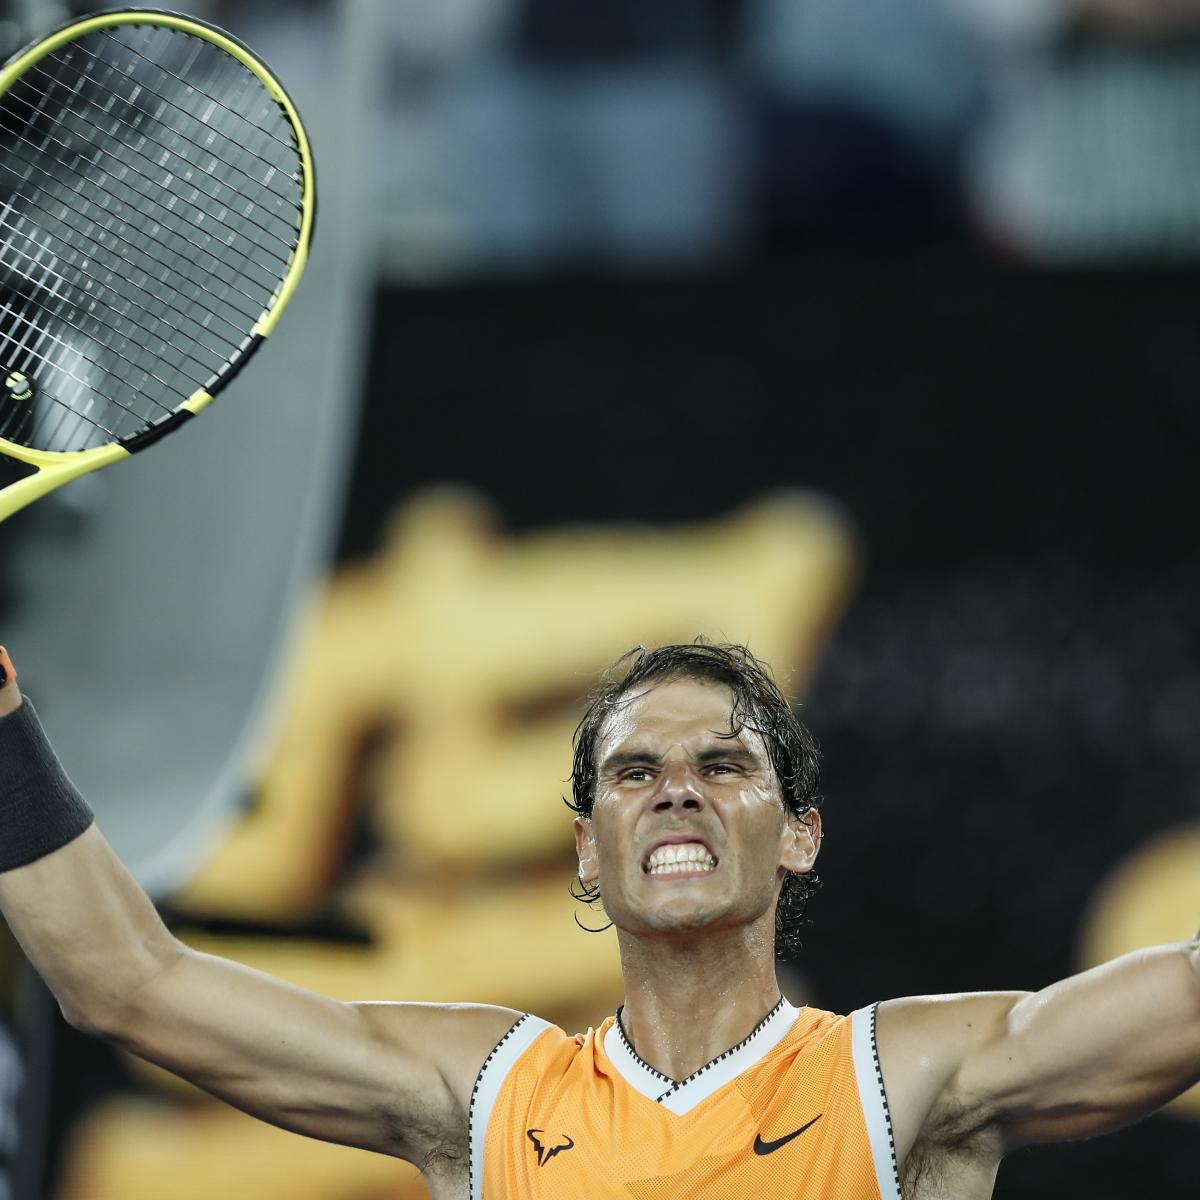 Australian Open 2019: Rafael Nadal's Win and More from Tuesday's Results | Bleacher ...